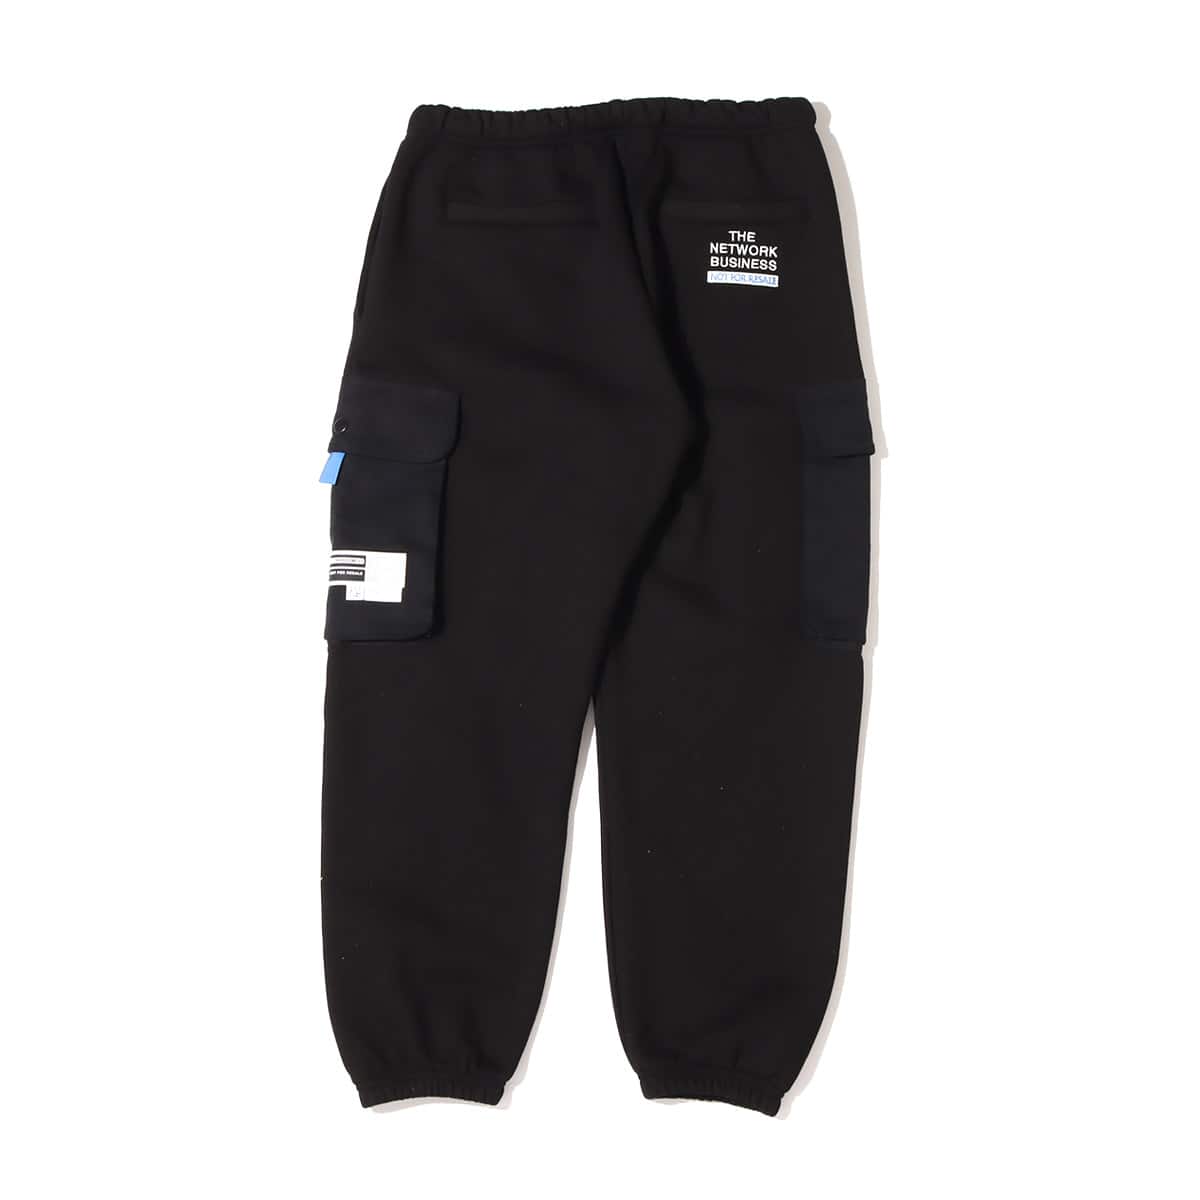 THE NETWORK BUSINESS × ANTHONY CARGO SWEAT PANTS 